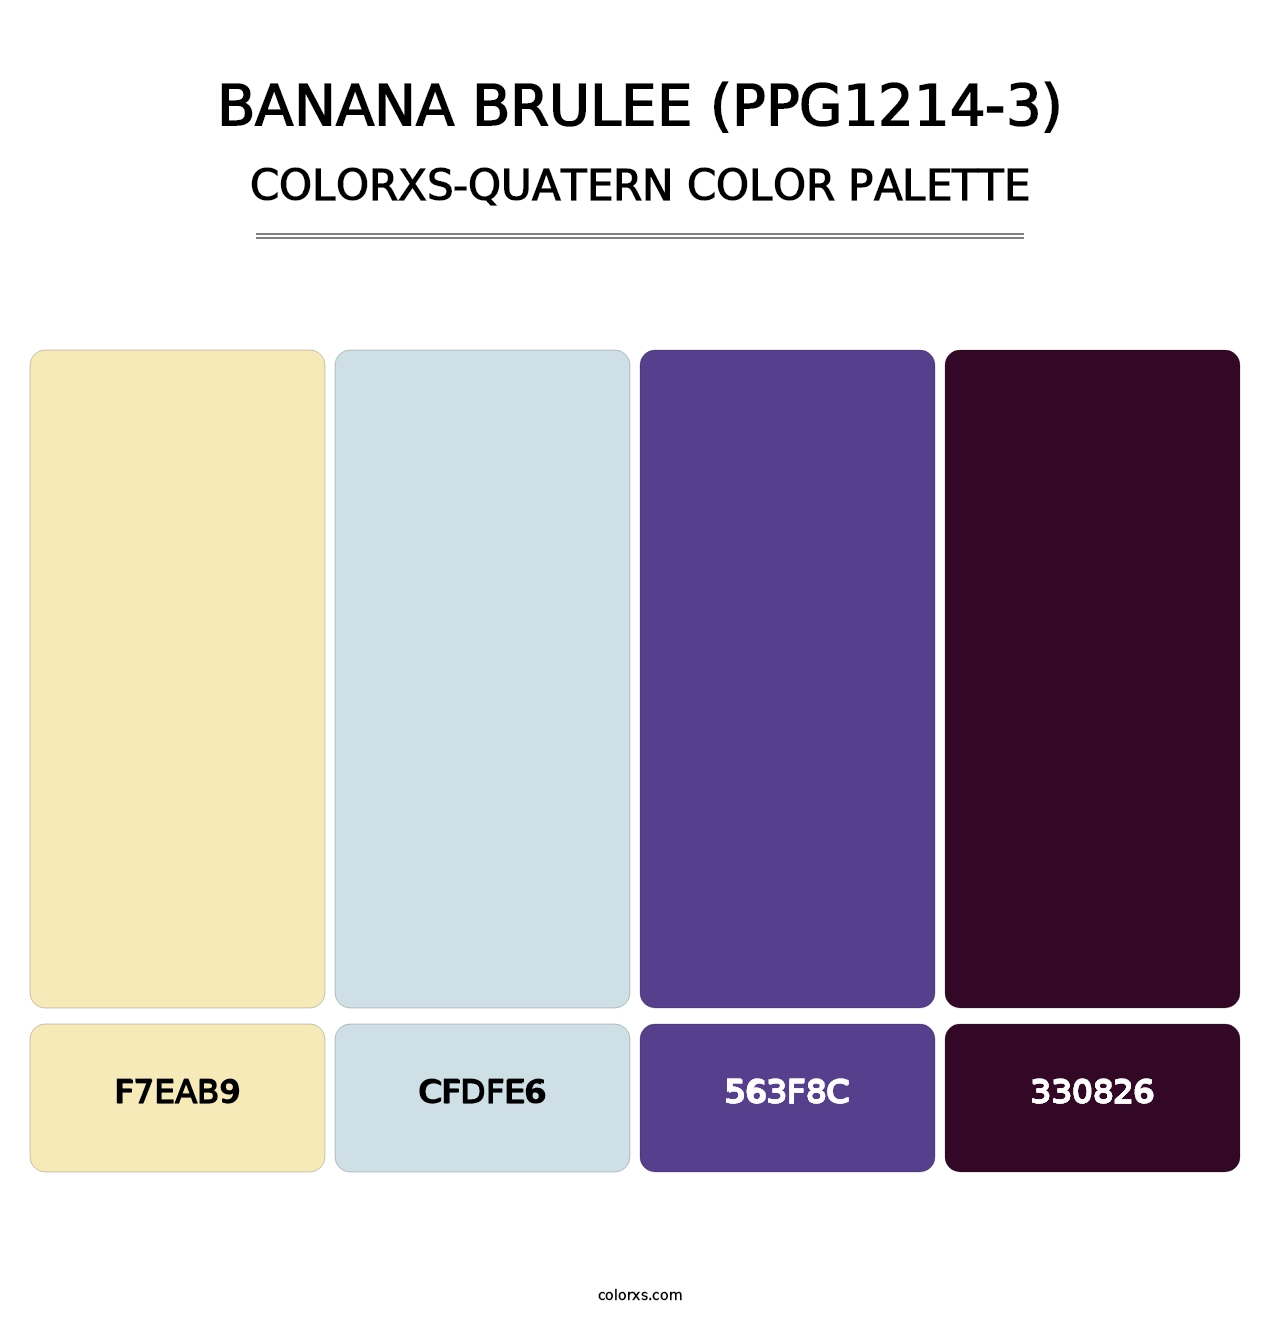 Banana Brulee (PPG1214-3) - Colorxs Quatern Palette